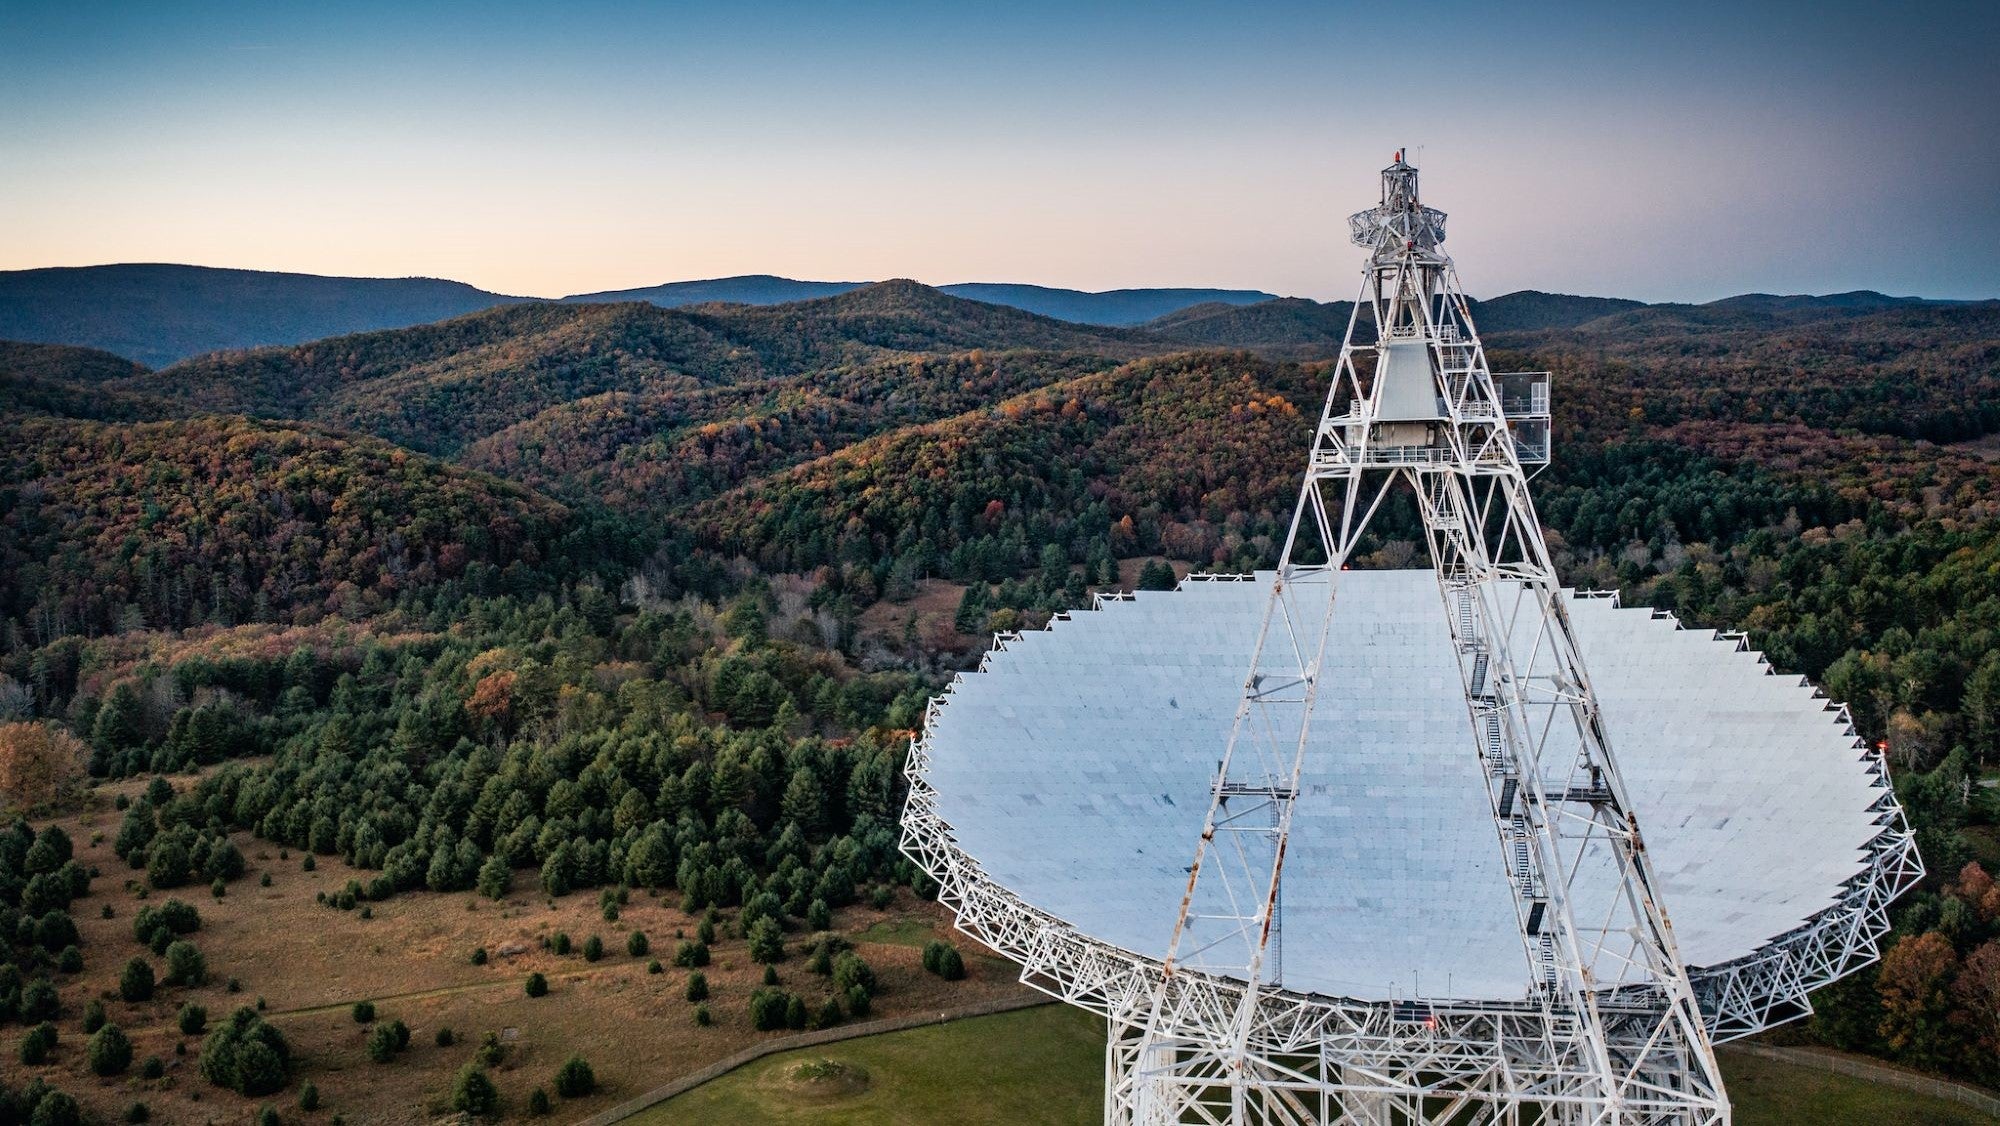 A large telescope array in the foreground with West Virginia hills behind it.